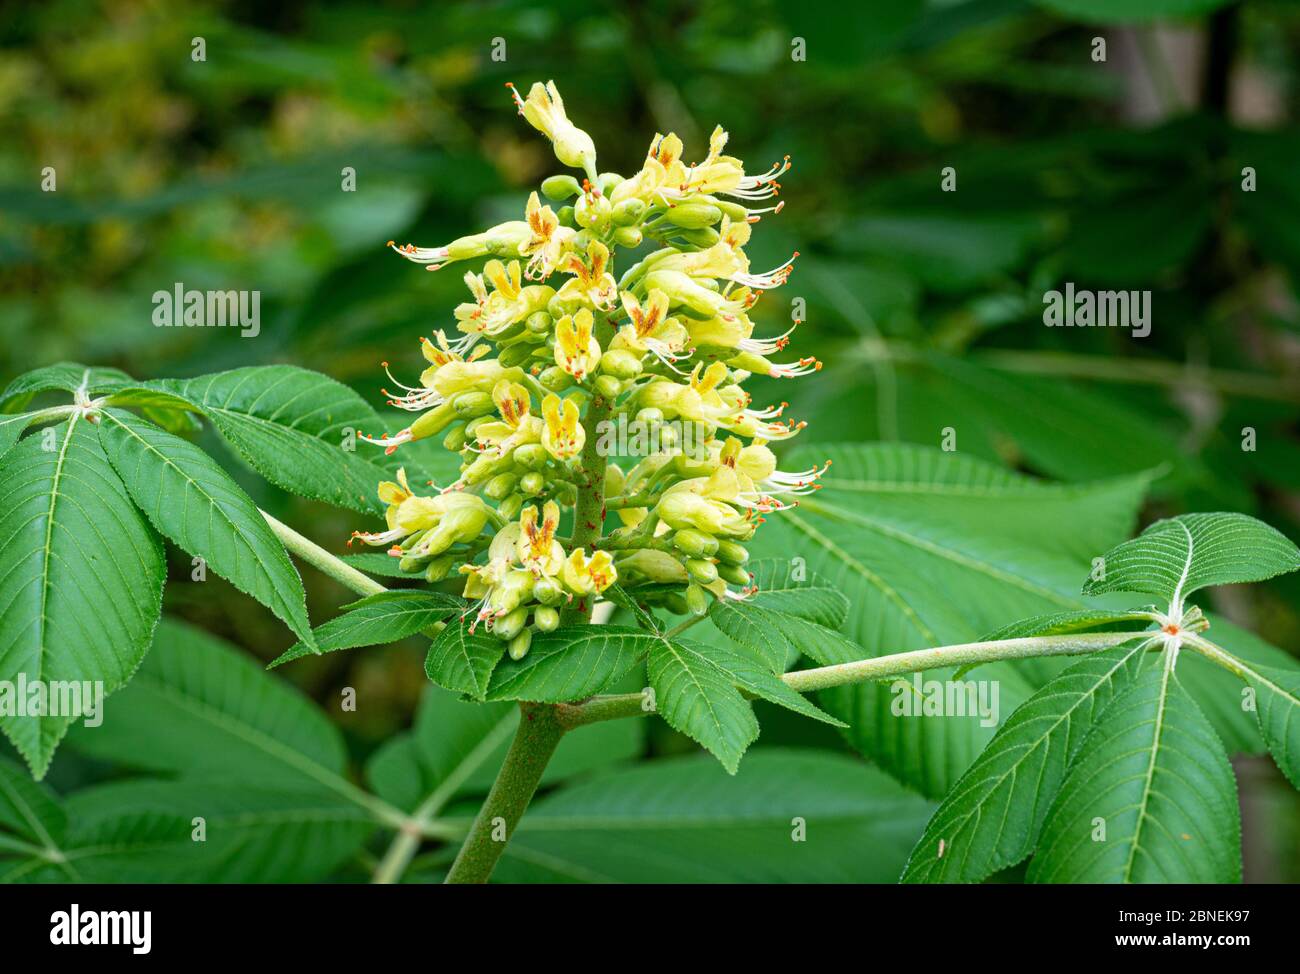 Flower panicle of  Ohio buckeye tree(Aesculus glabra), a native to the midwestern states. Stock Photo